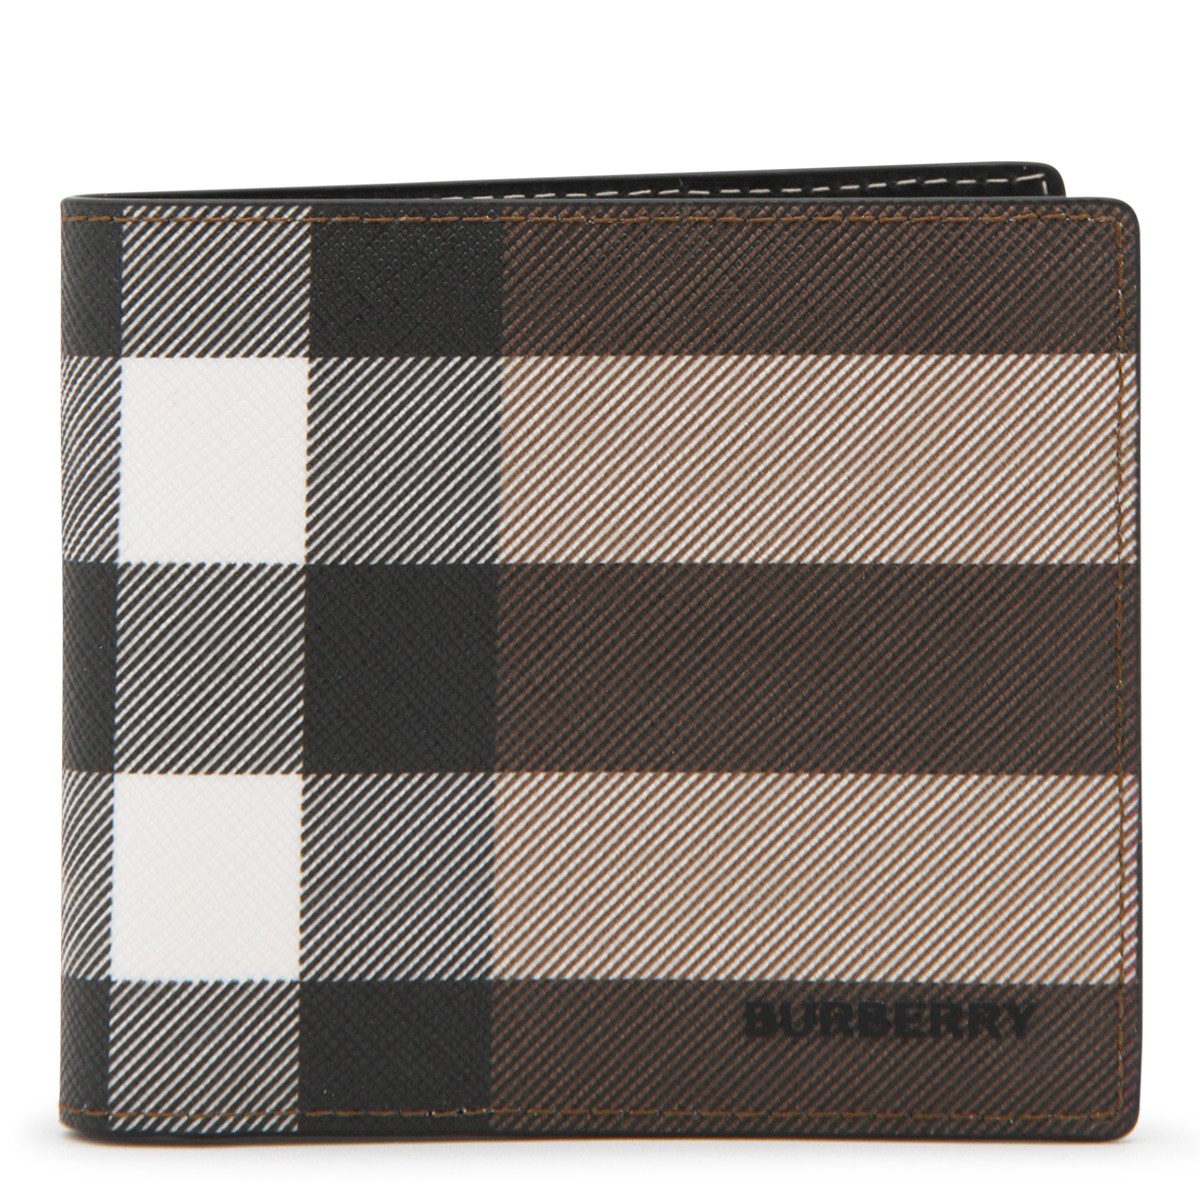 EXAGGERATED CHECK CANVAS WALLET 